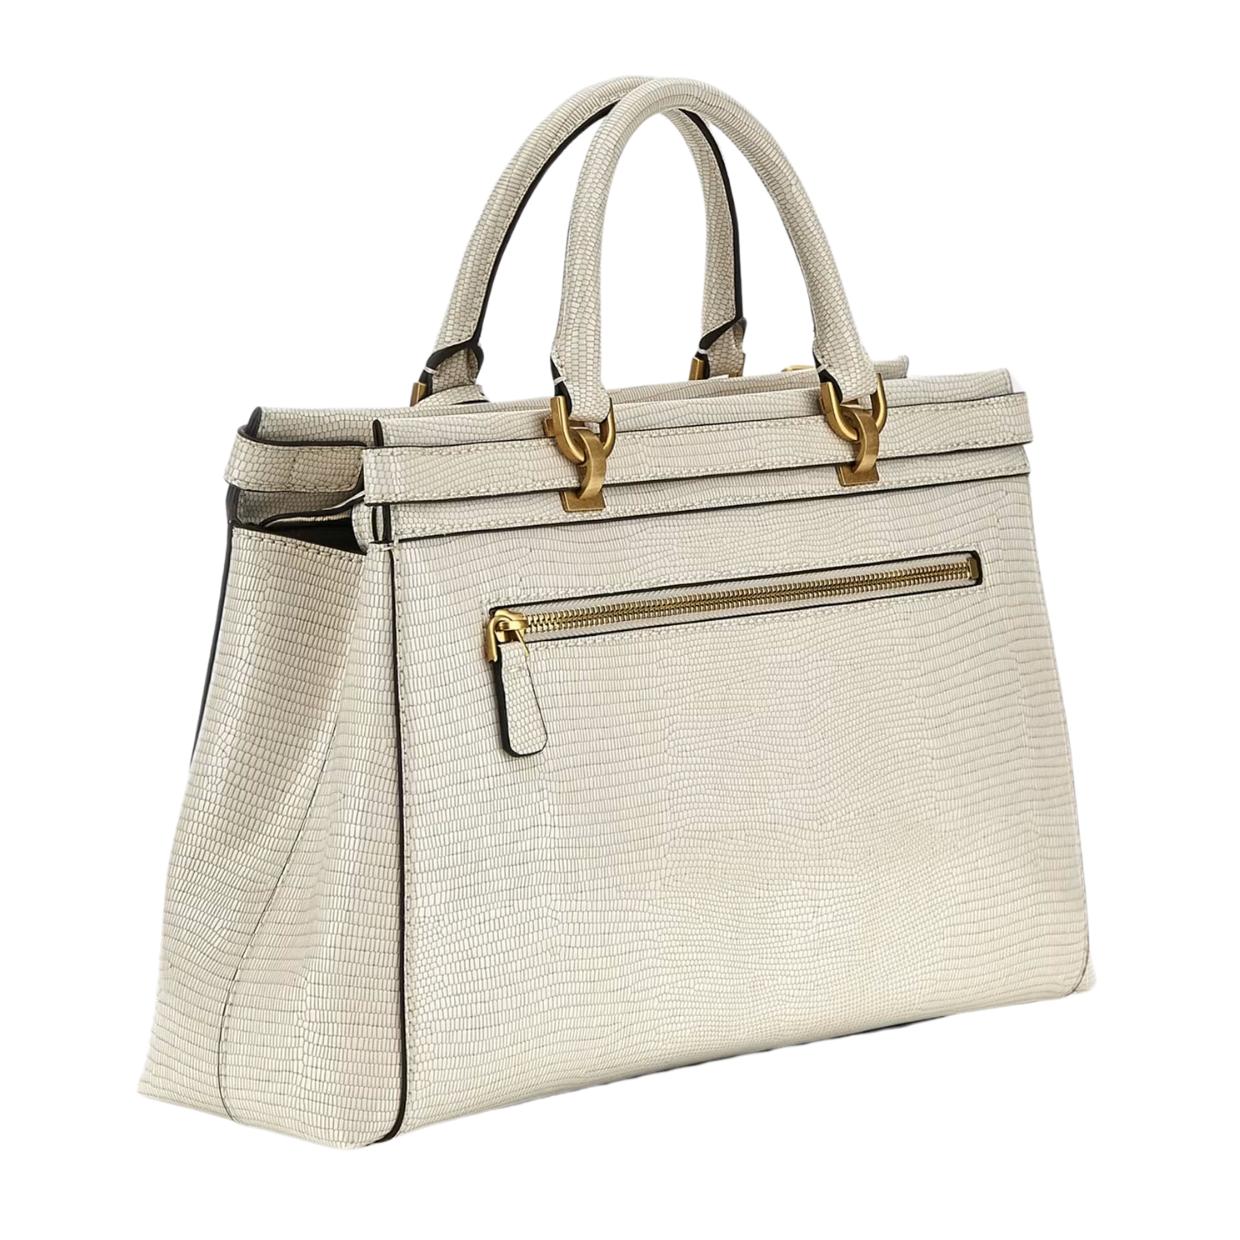 Guess Buckle Sestri Stone Tote Bag